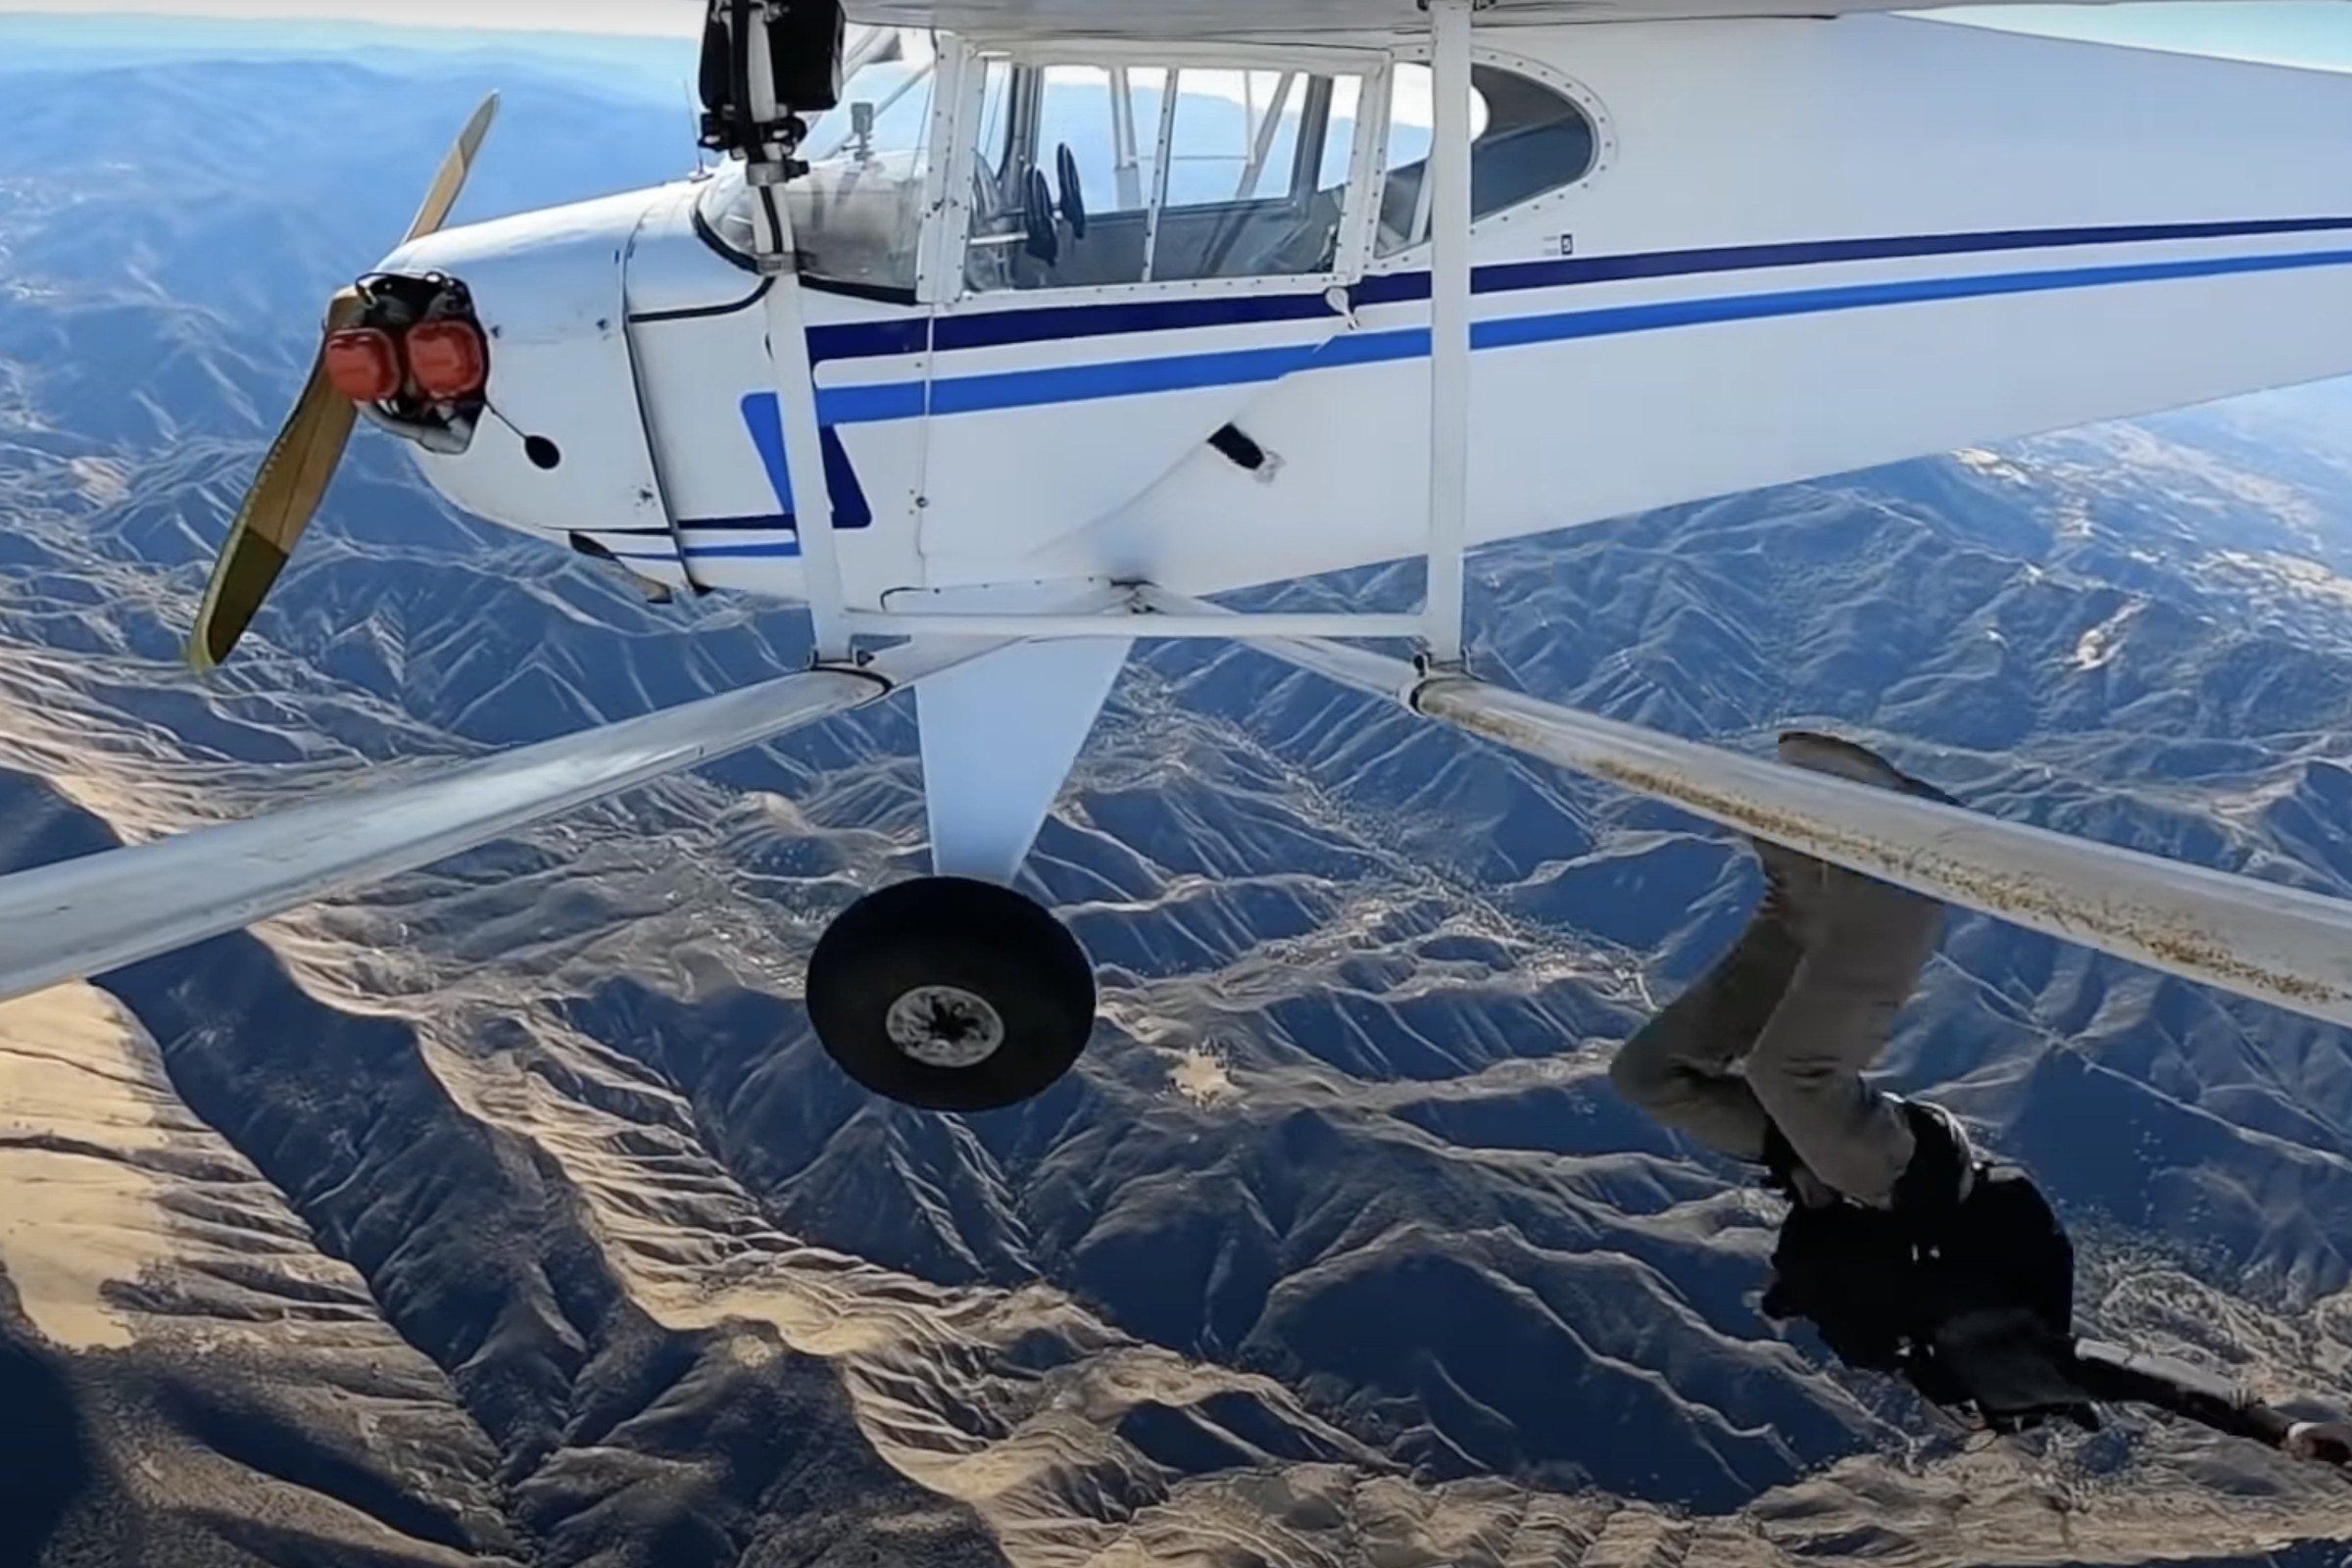 A pilotless plane viewed from the wing in middair. The image is taken from Trevor Daniel Jacob’s YouTube video of him intentionally crashing the plane.